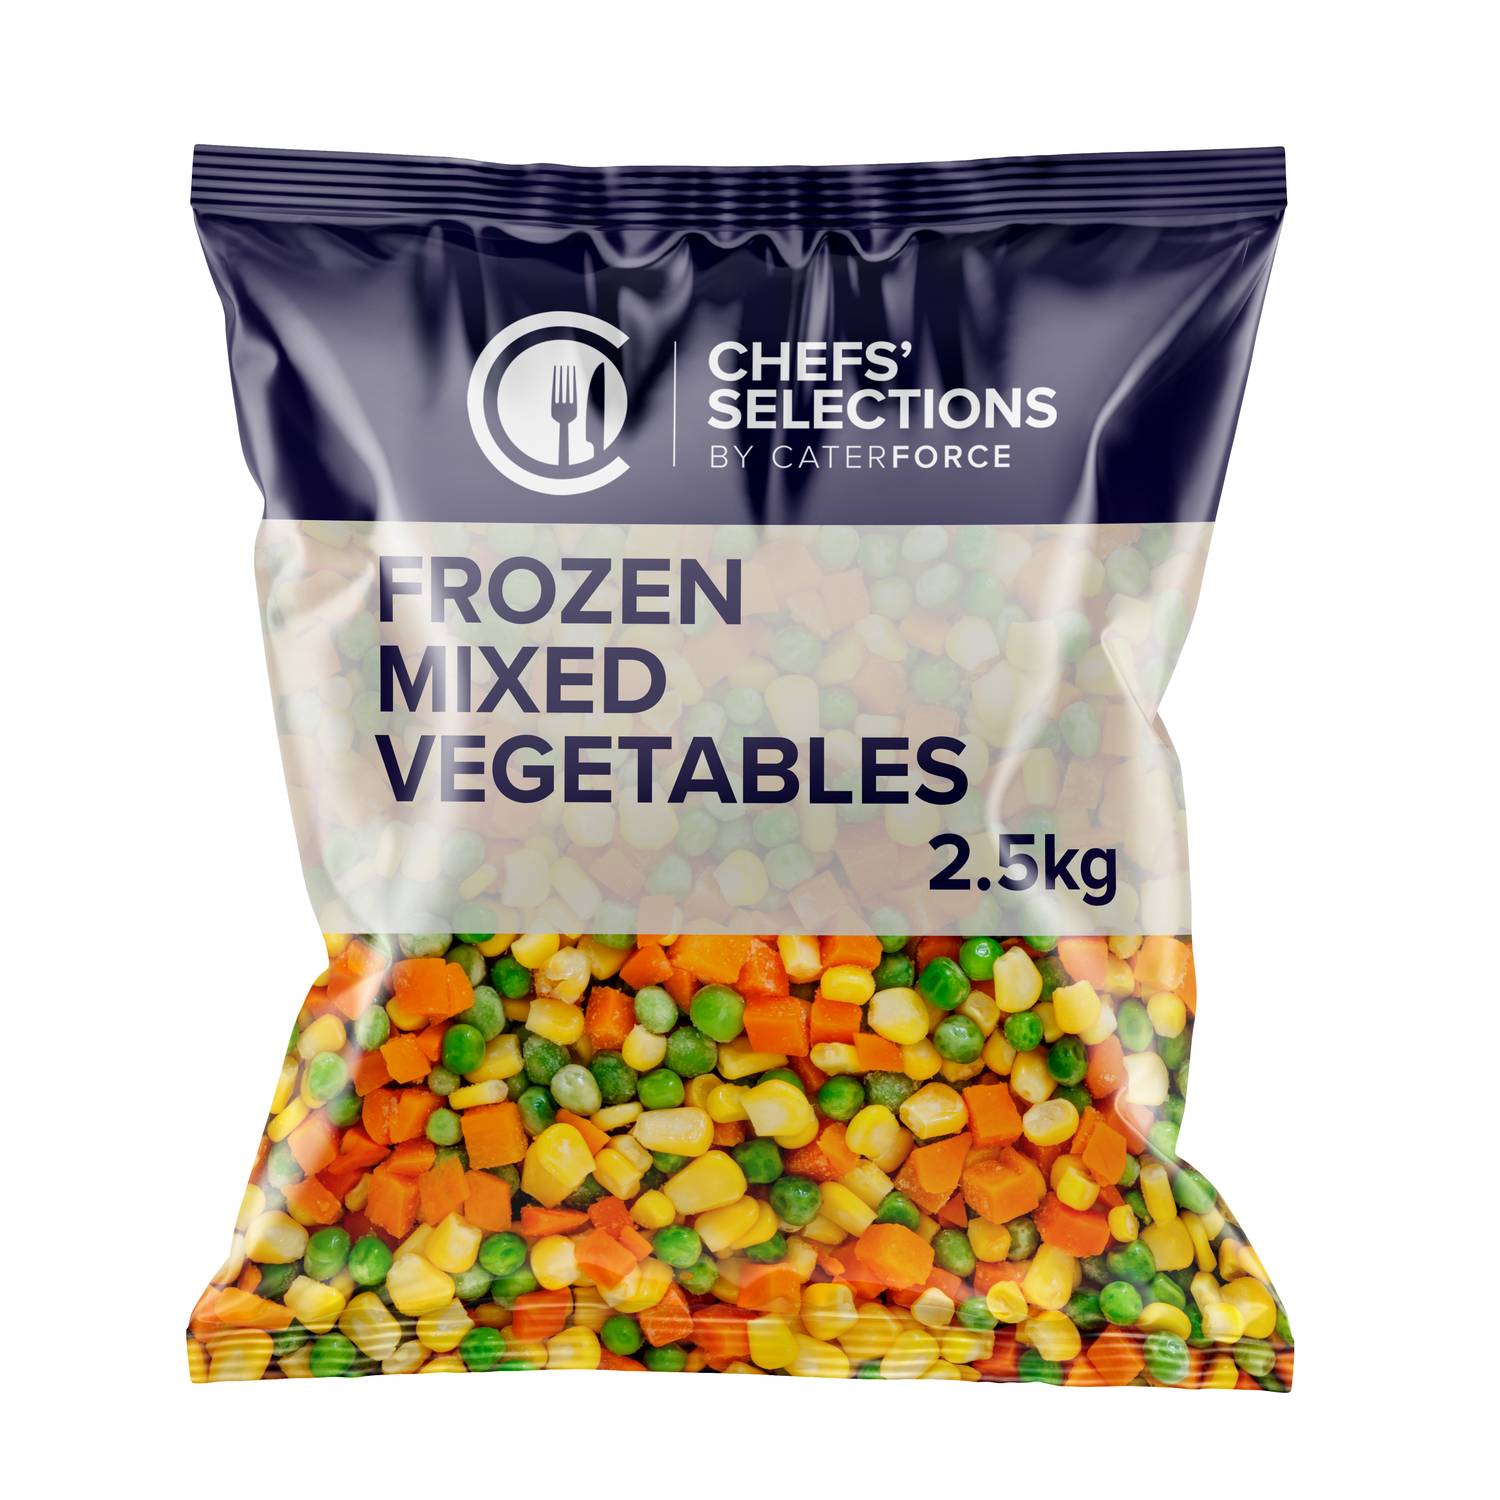 Chefs’ Selections Frozen Mixed Vegetables (4 x 2.5kg)